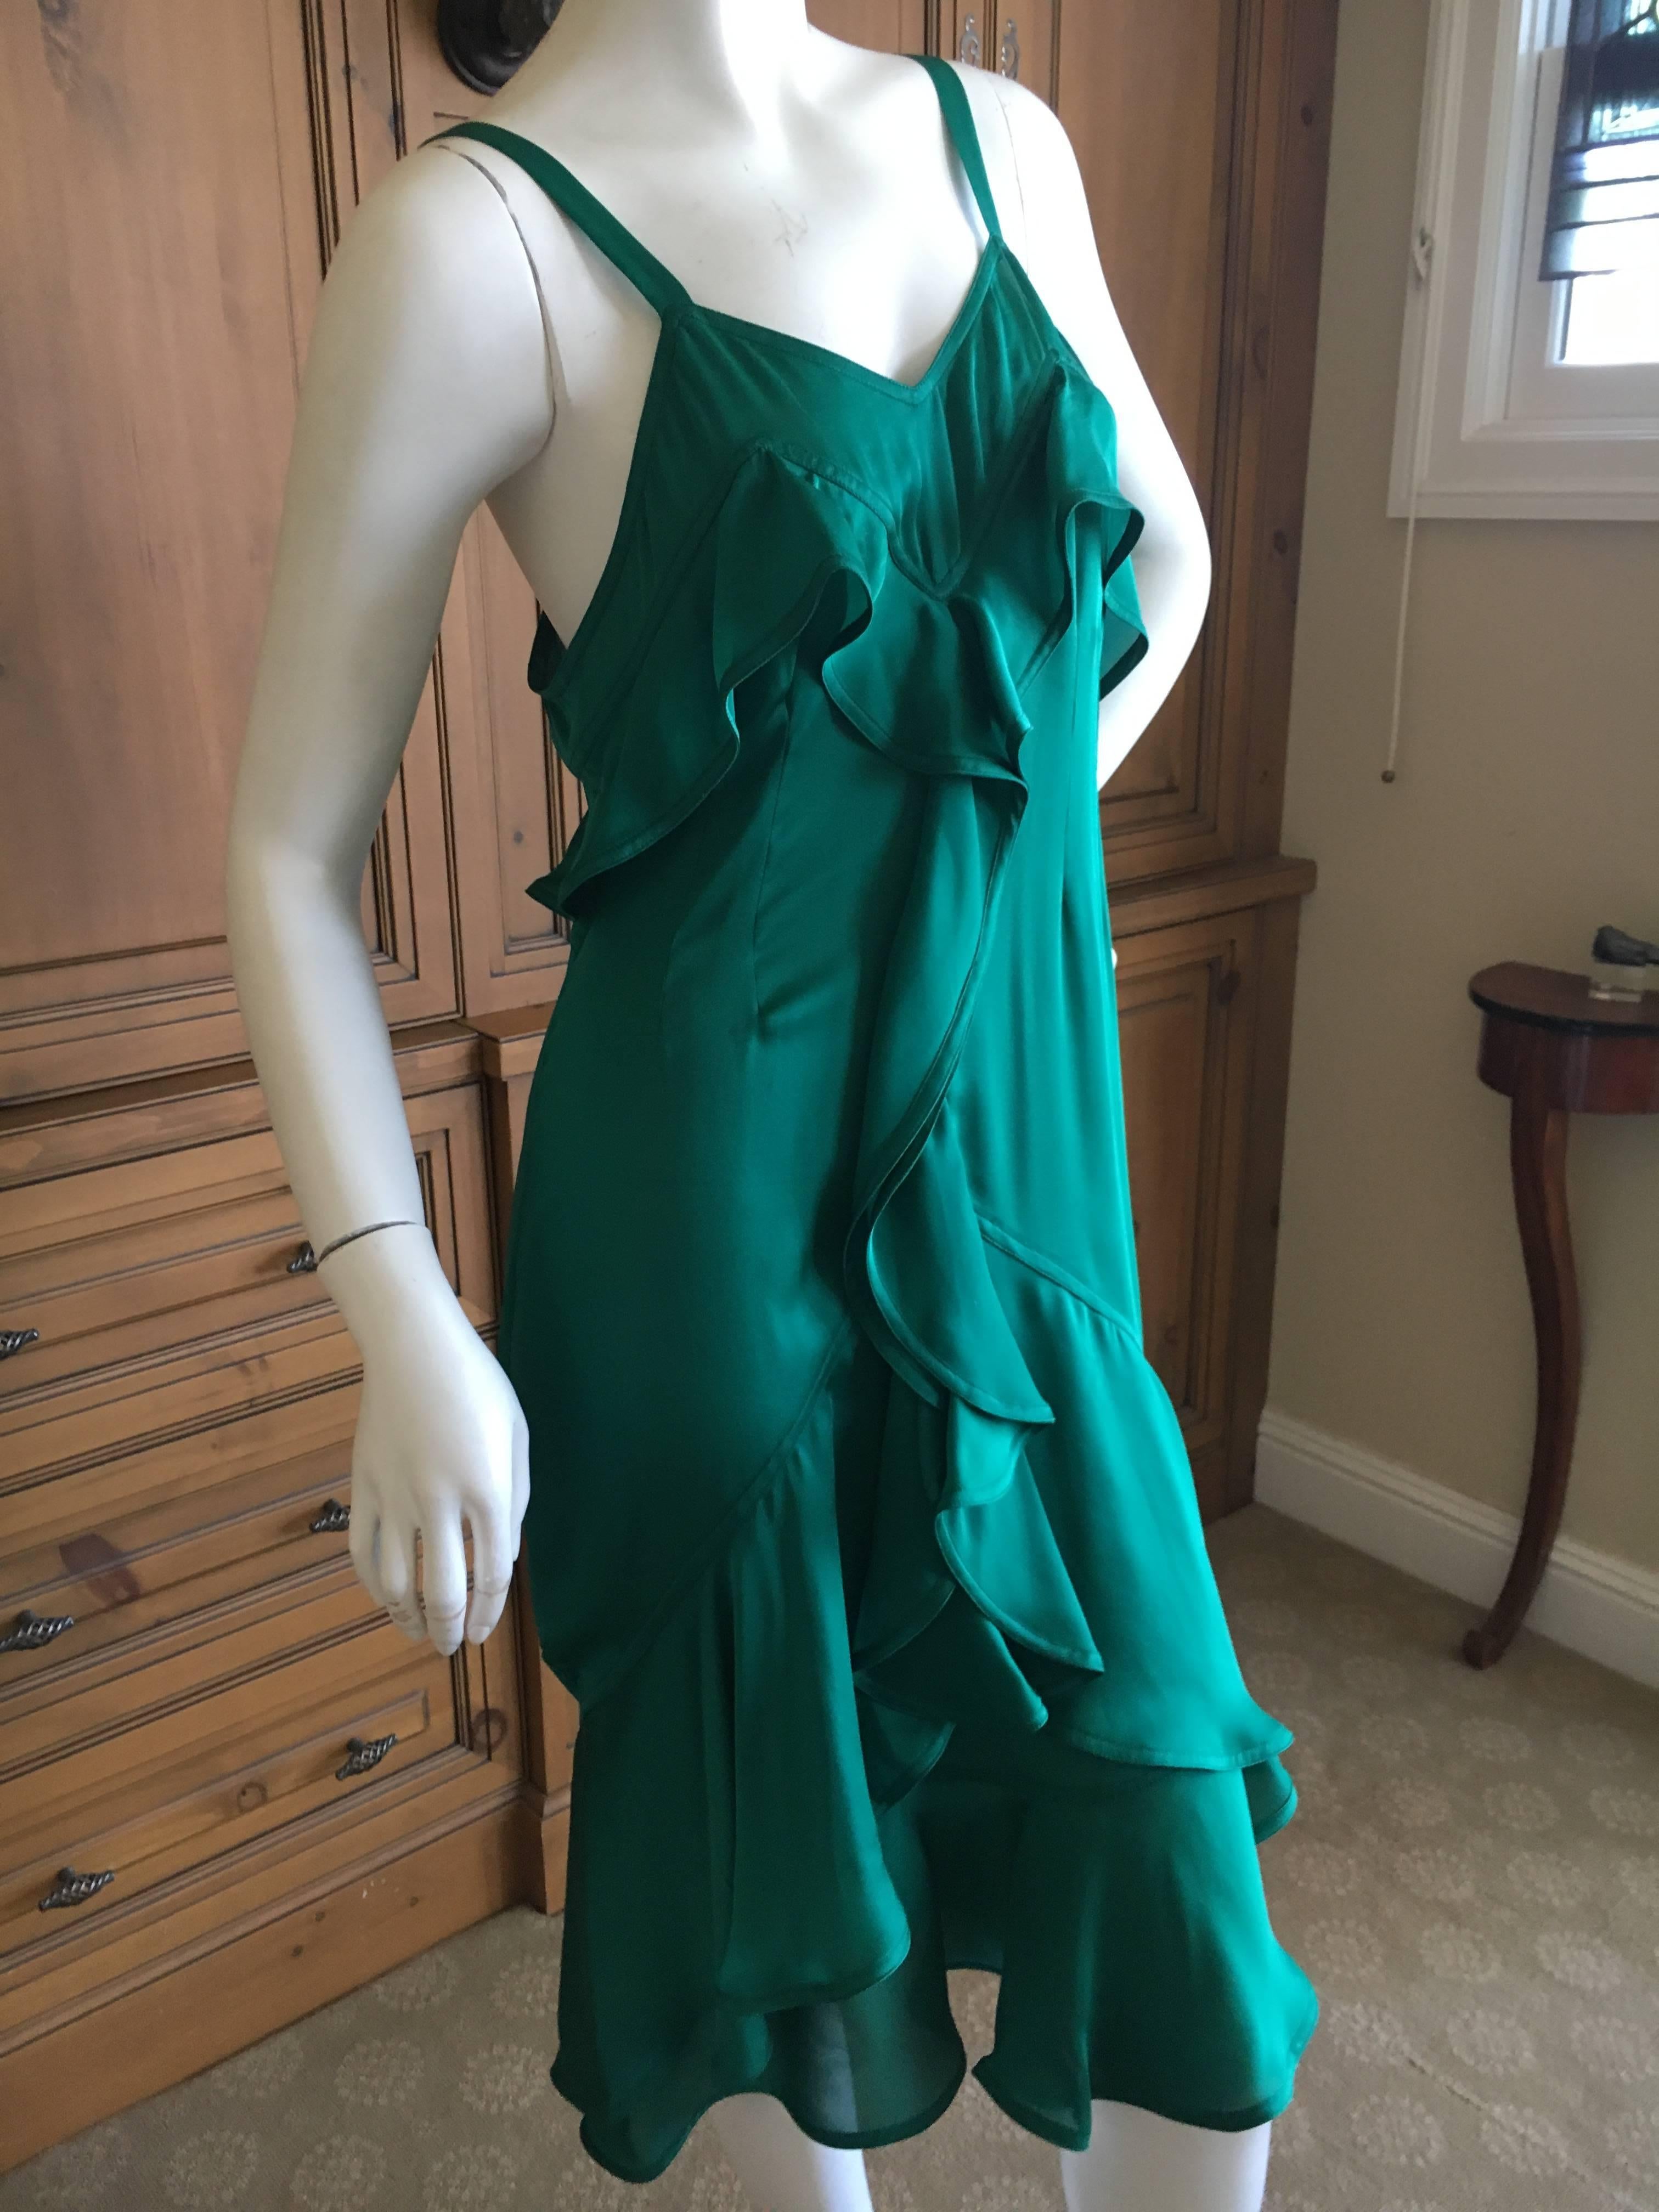 Yves Saint Laurent Tom Ford Fall 2003 Look 1 Green Ruffle Dress.
Exquisite green silk dress from Tom Ford YSL. This version is in silk with edging on the ruffles. I have never seen this version, most are raw edged.
Size 42
Bust 39"
Waist